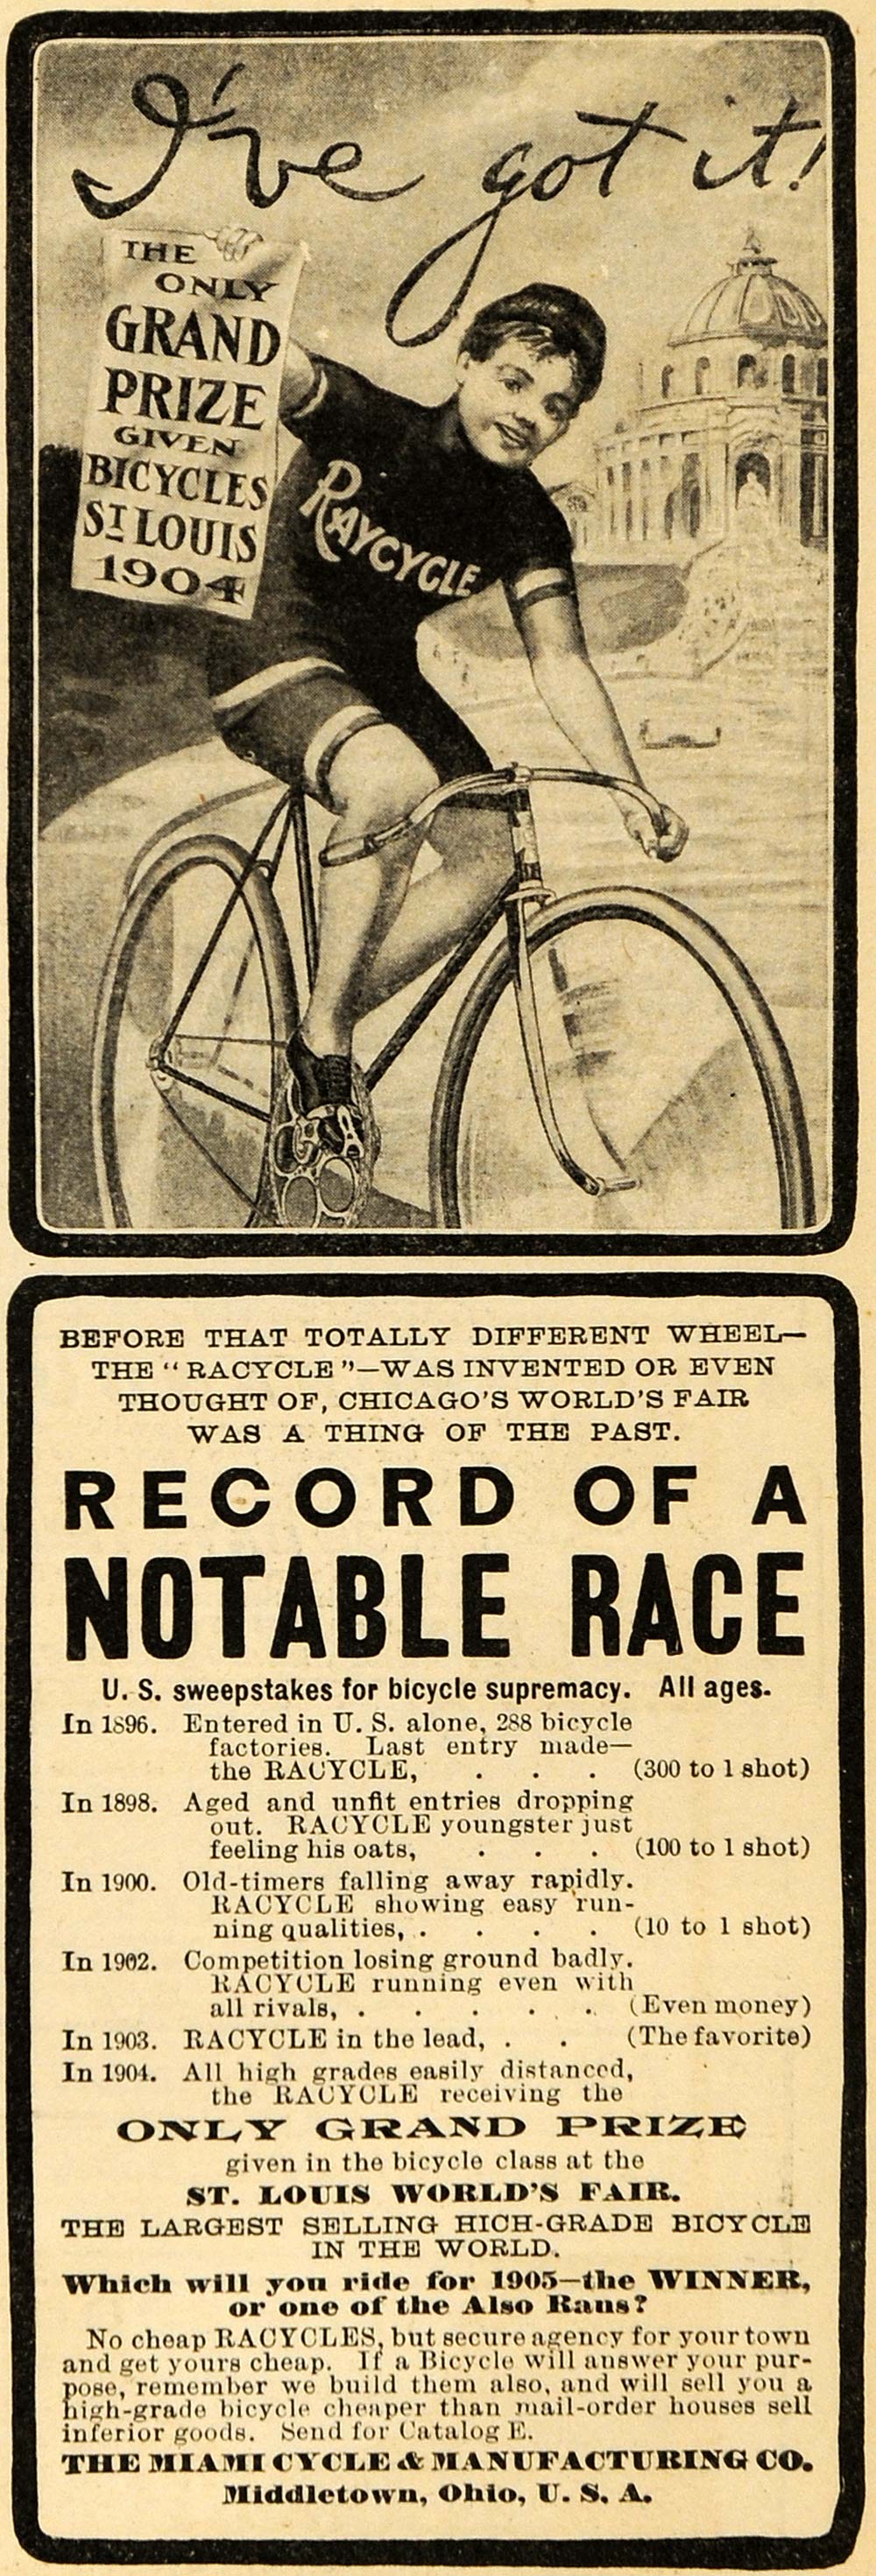 1905 Ad Miami Cycle & Manufacturing Co. Bicycle Race - ORIGINAL ADVERTISING ARG1